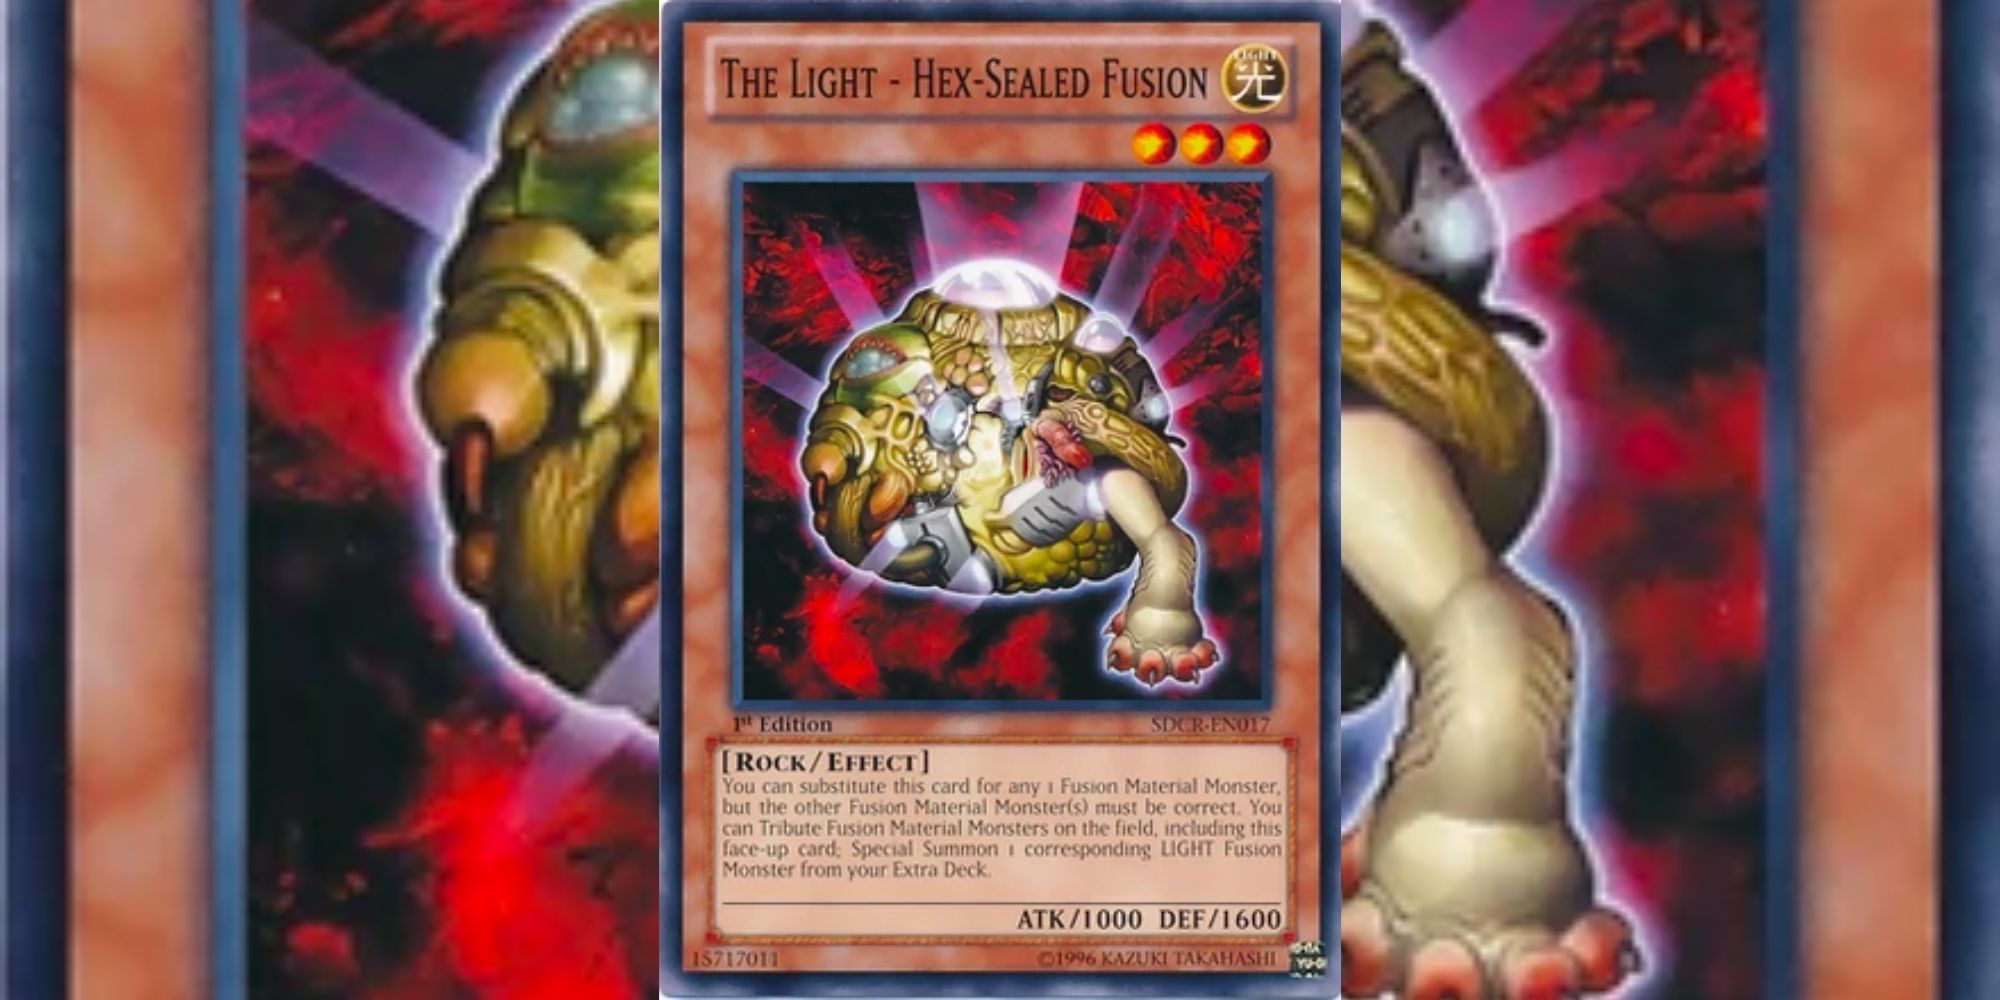 The Light - Hex-Sealed Fusion card in Yu-Gi-Oh!